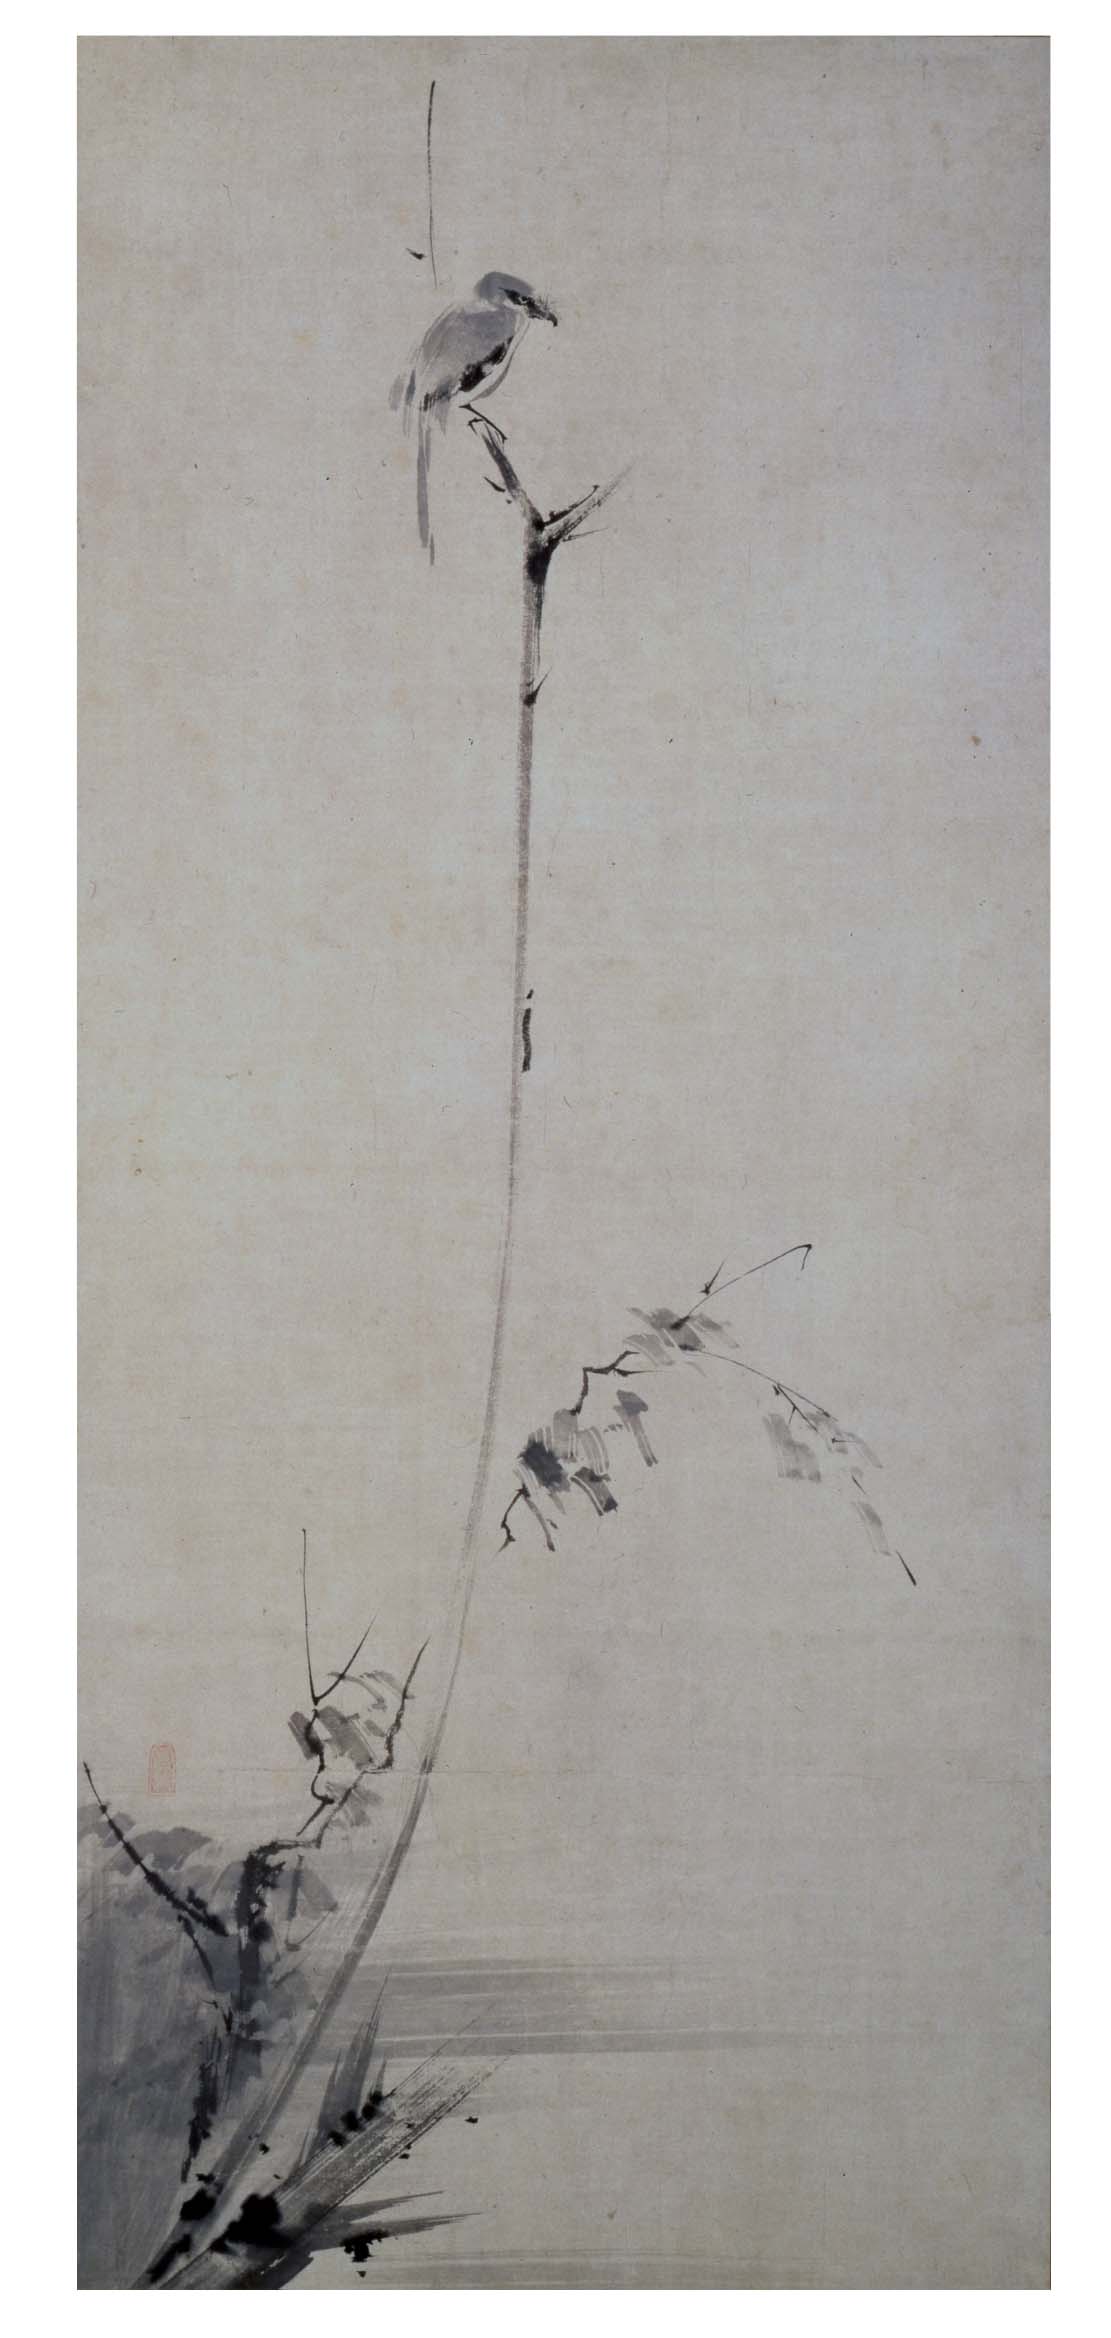 This picture was drawn by Miyamoto Musashi who is famous as a master swordsman in the 17th century. 